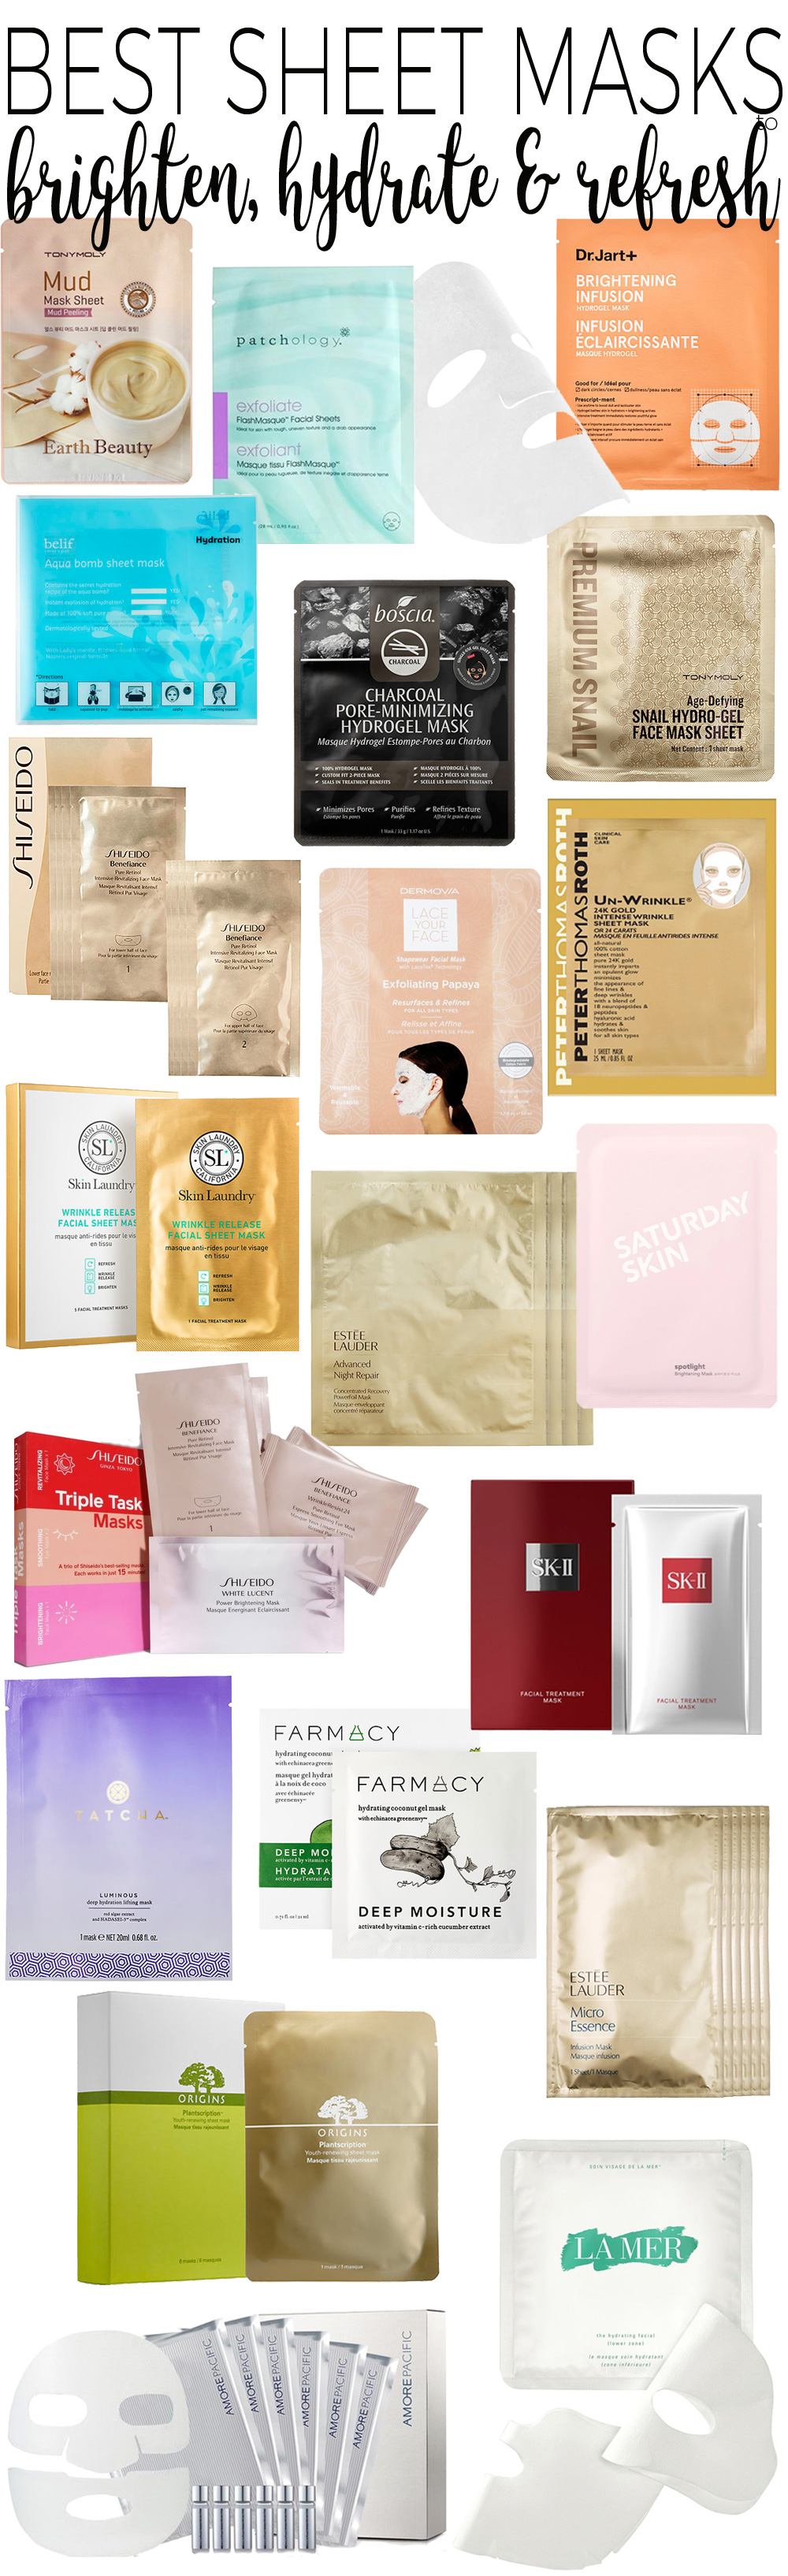 Top 20 Sheet Masks to Brighten, Hydrate and Refresh Skin. — Beautiful Search